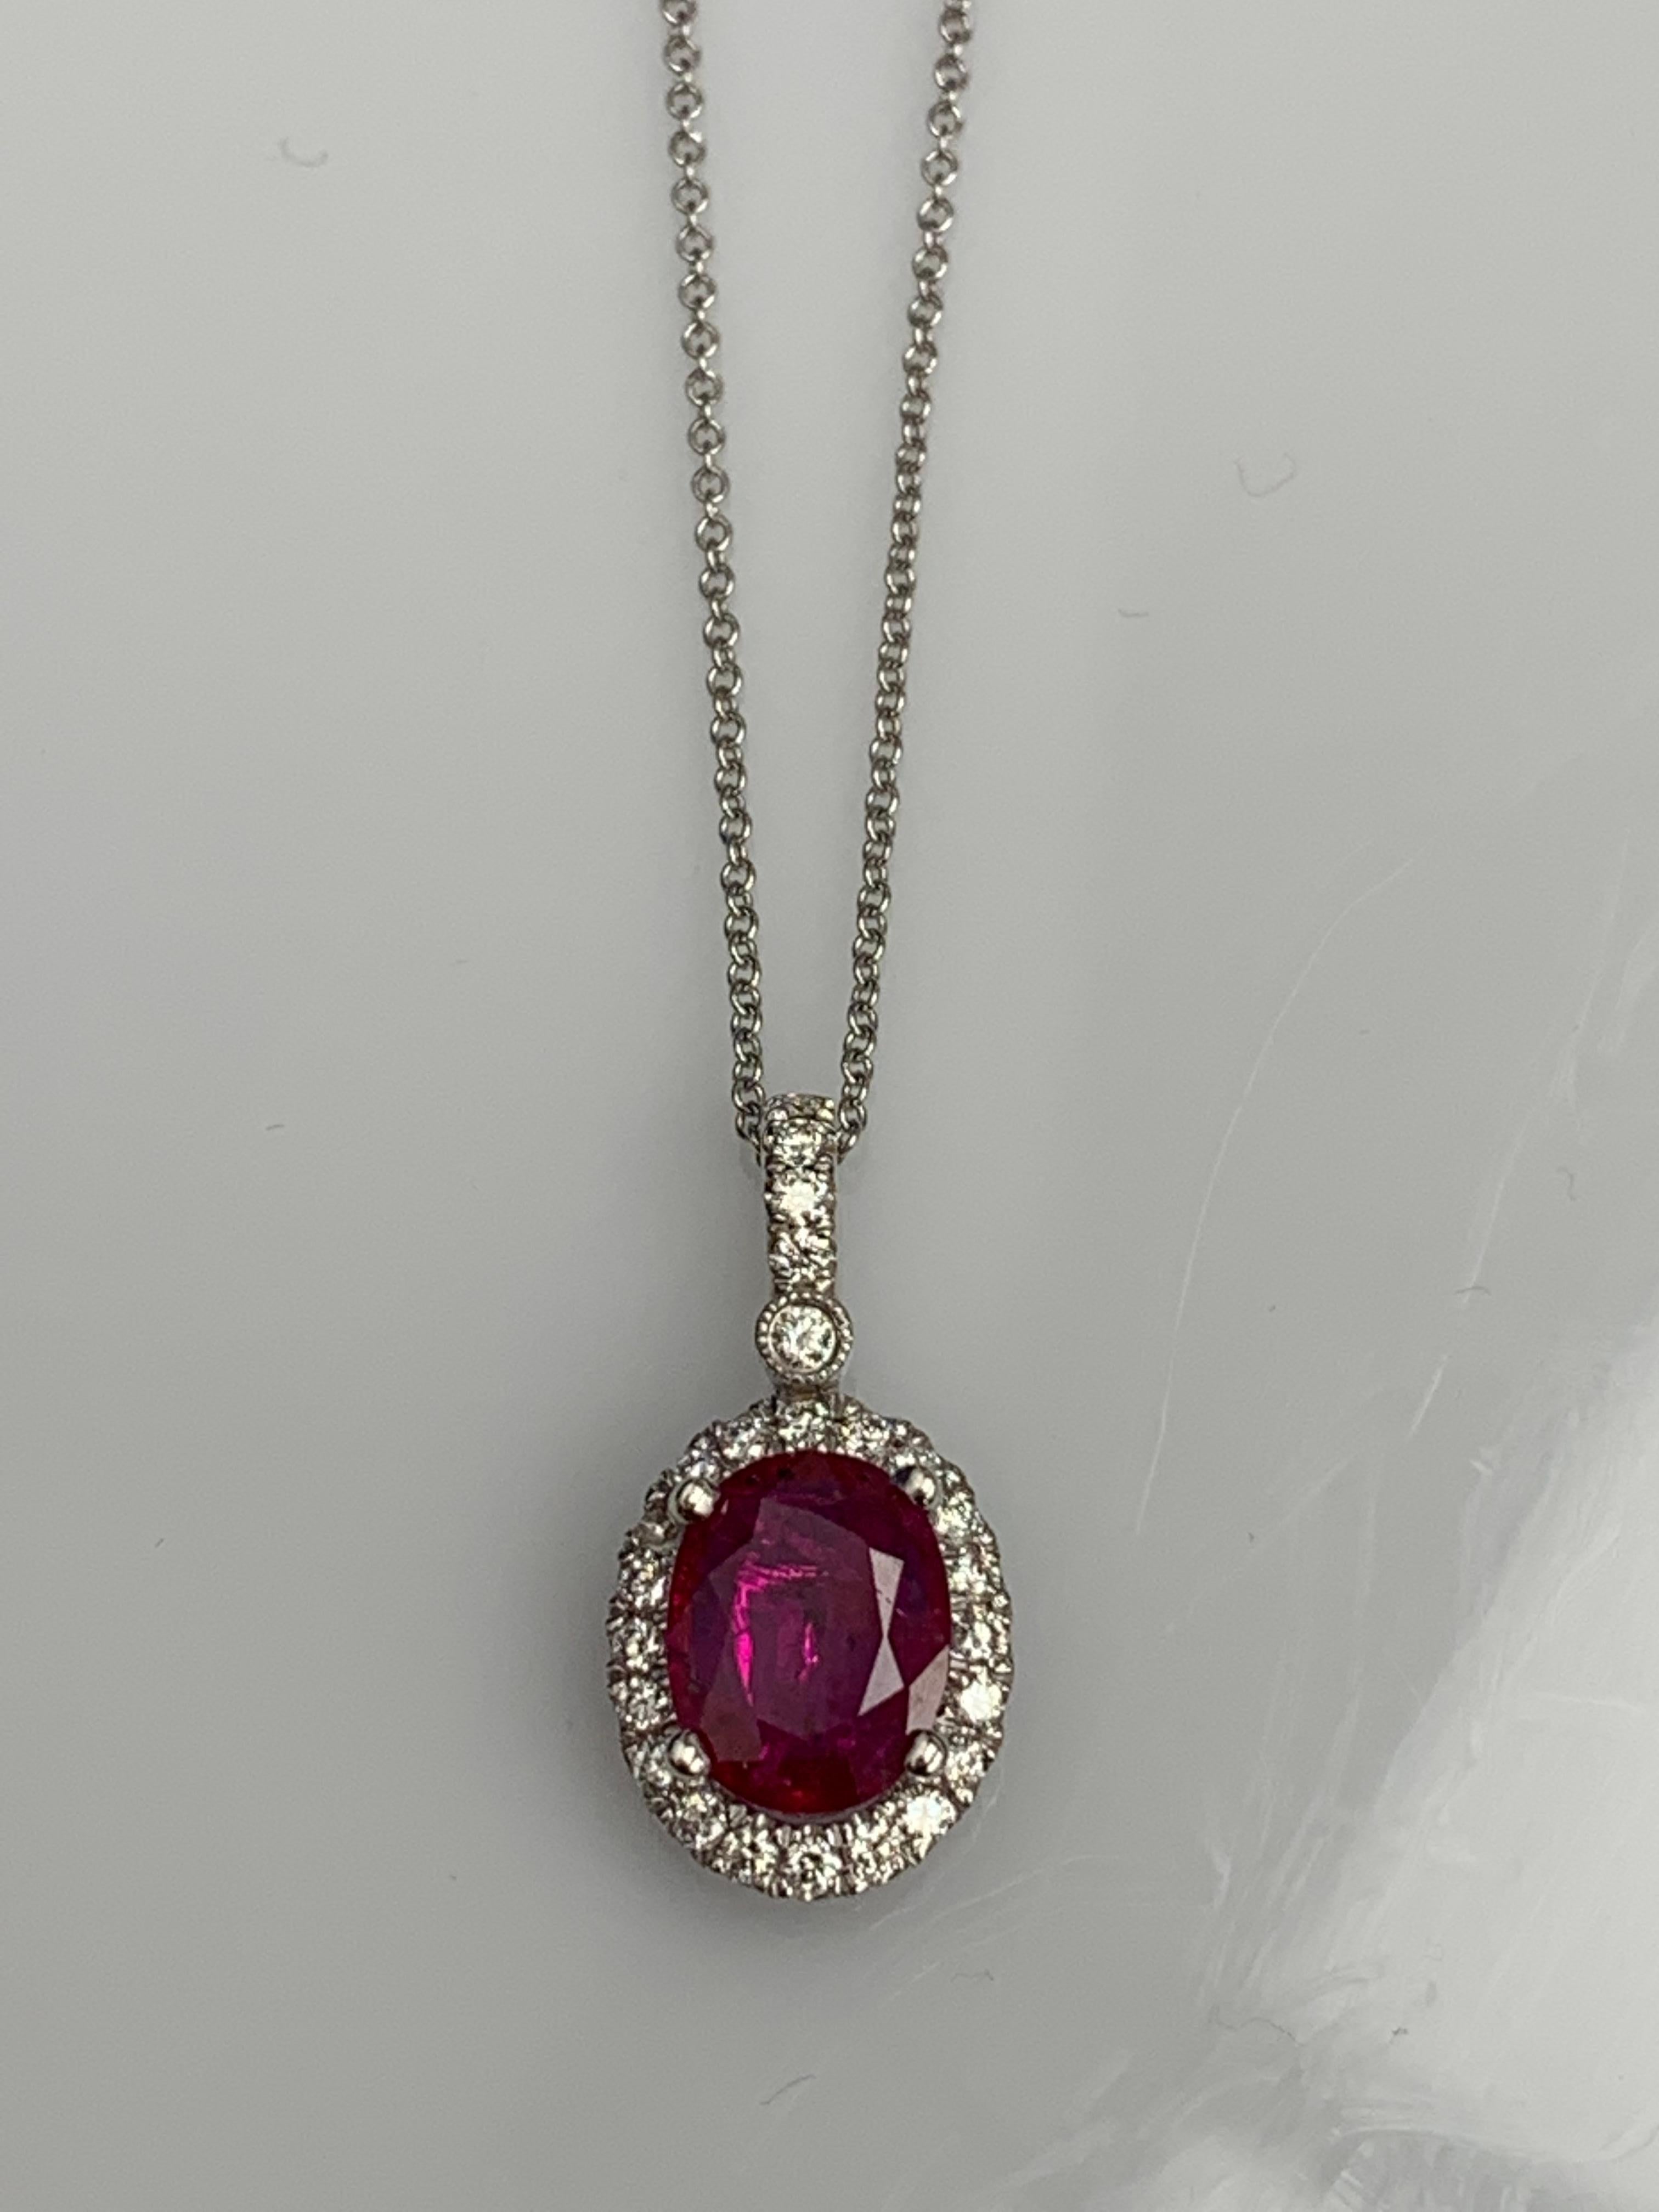 A simple pendant necklace showcasing a vibrant 2.10-carat oval cut red ruby, surrounded by 
0.75 carats of 25 accent round diamonds. Made in 18 karats white gold.

Style is available in different price ranges. Prices are based on your selection of